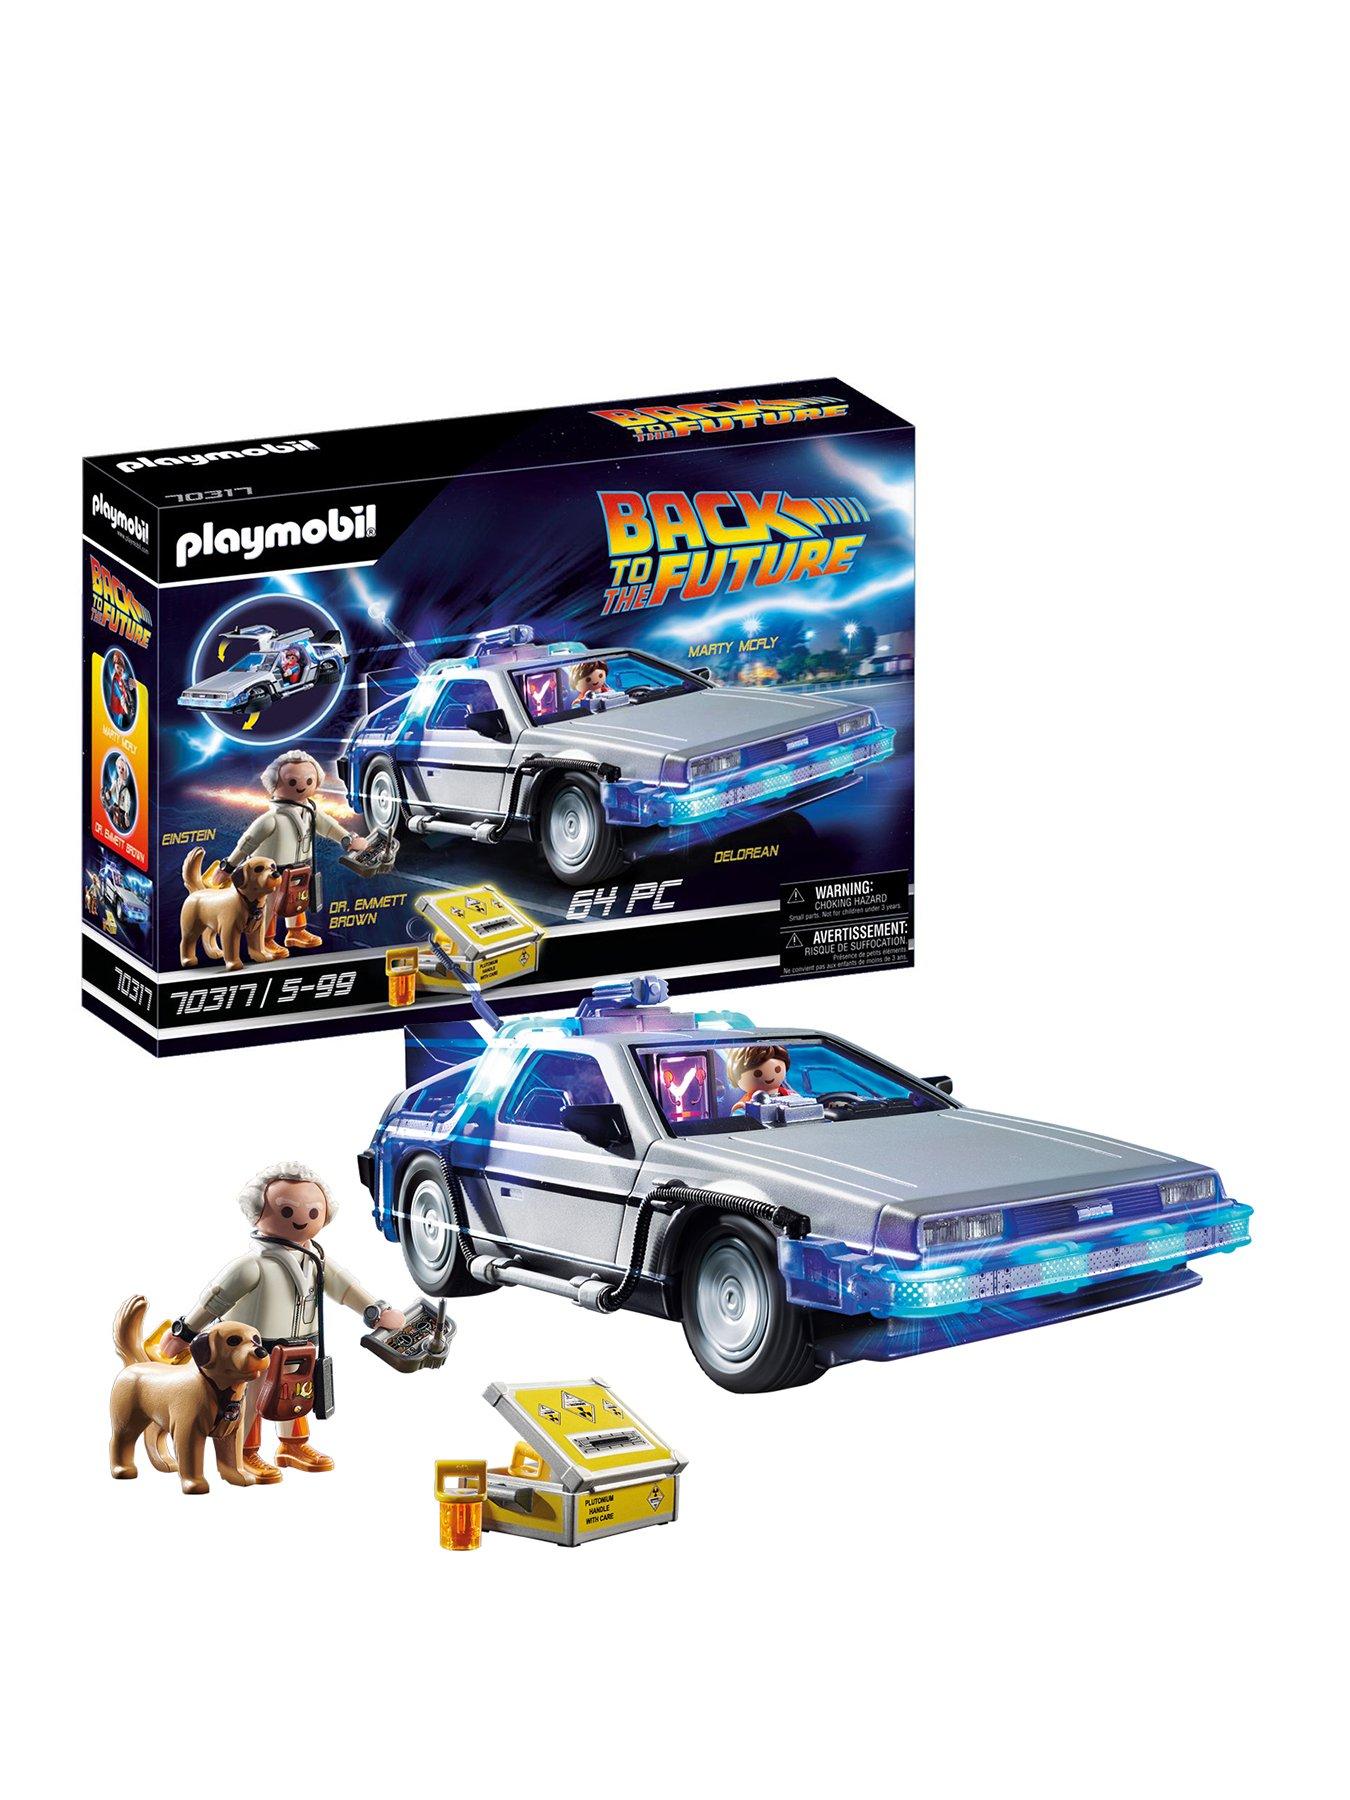 Playmobil 70317 Back to the Future© DeLorean | Very.co.uk